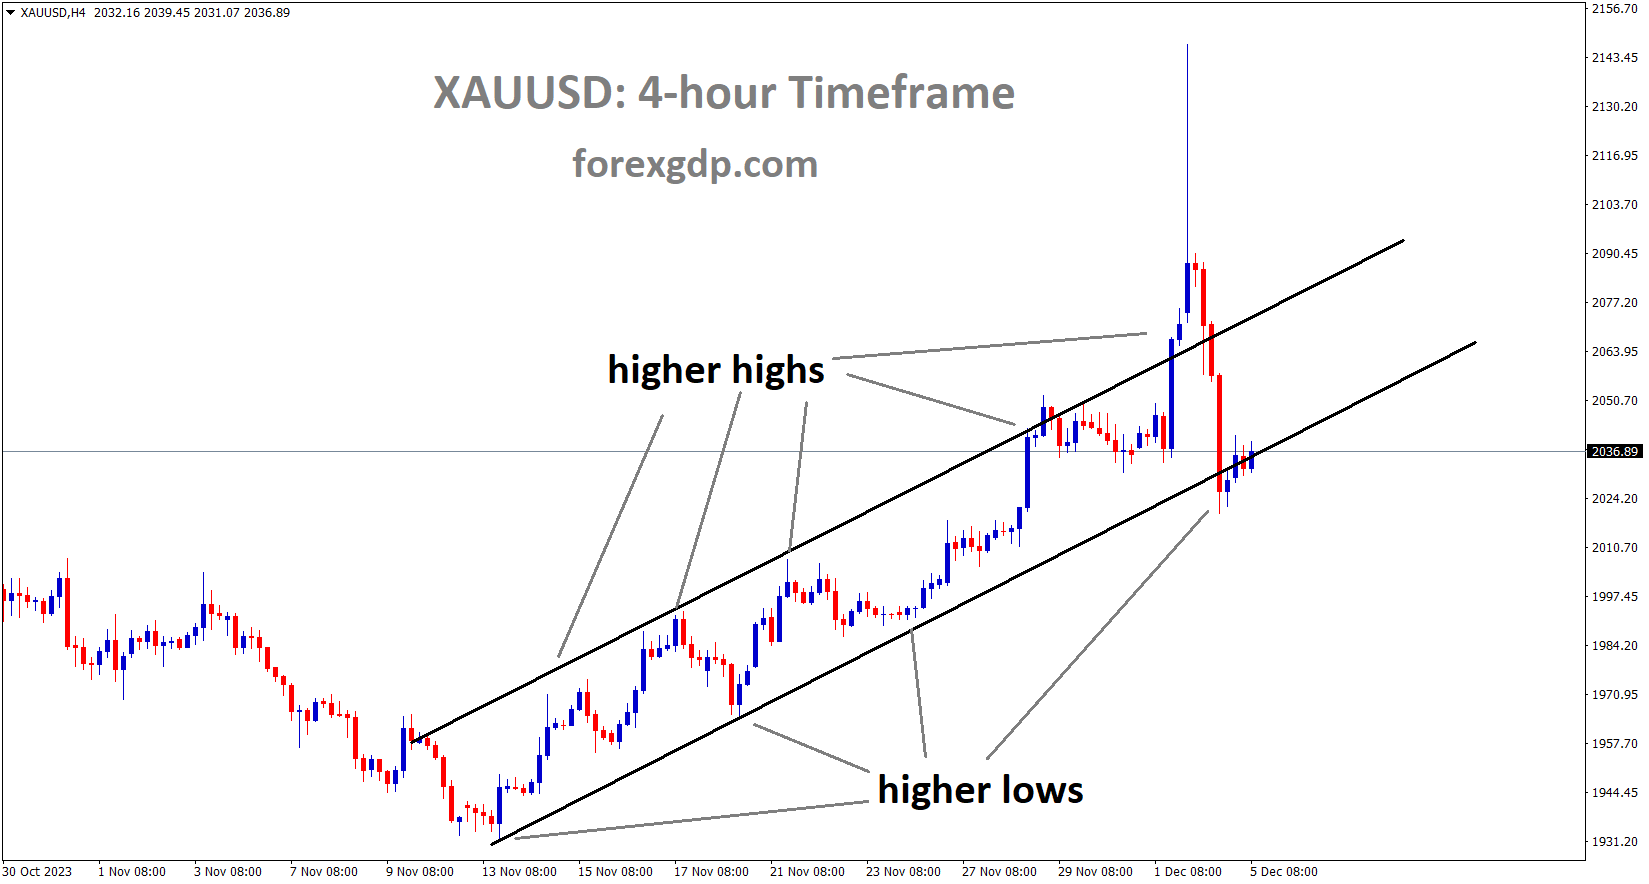 XAUUSD Gold price is moving in an Ascending channel and the market has reached the higher low area of the channel